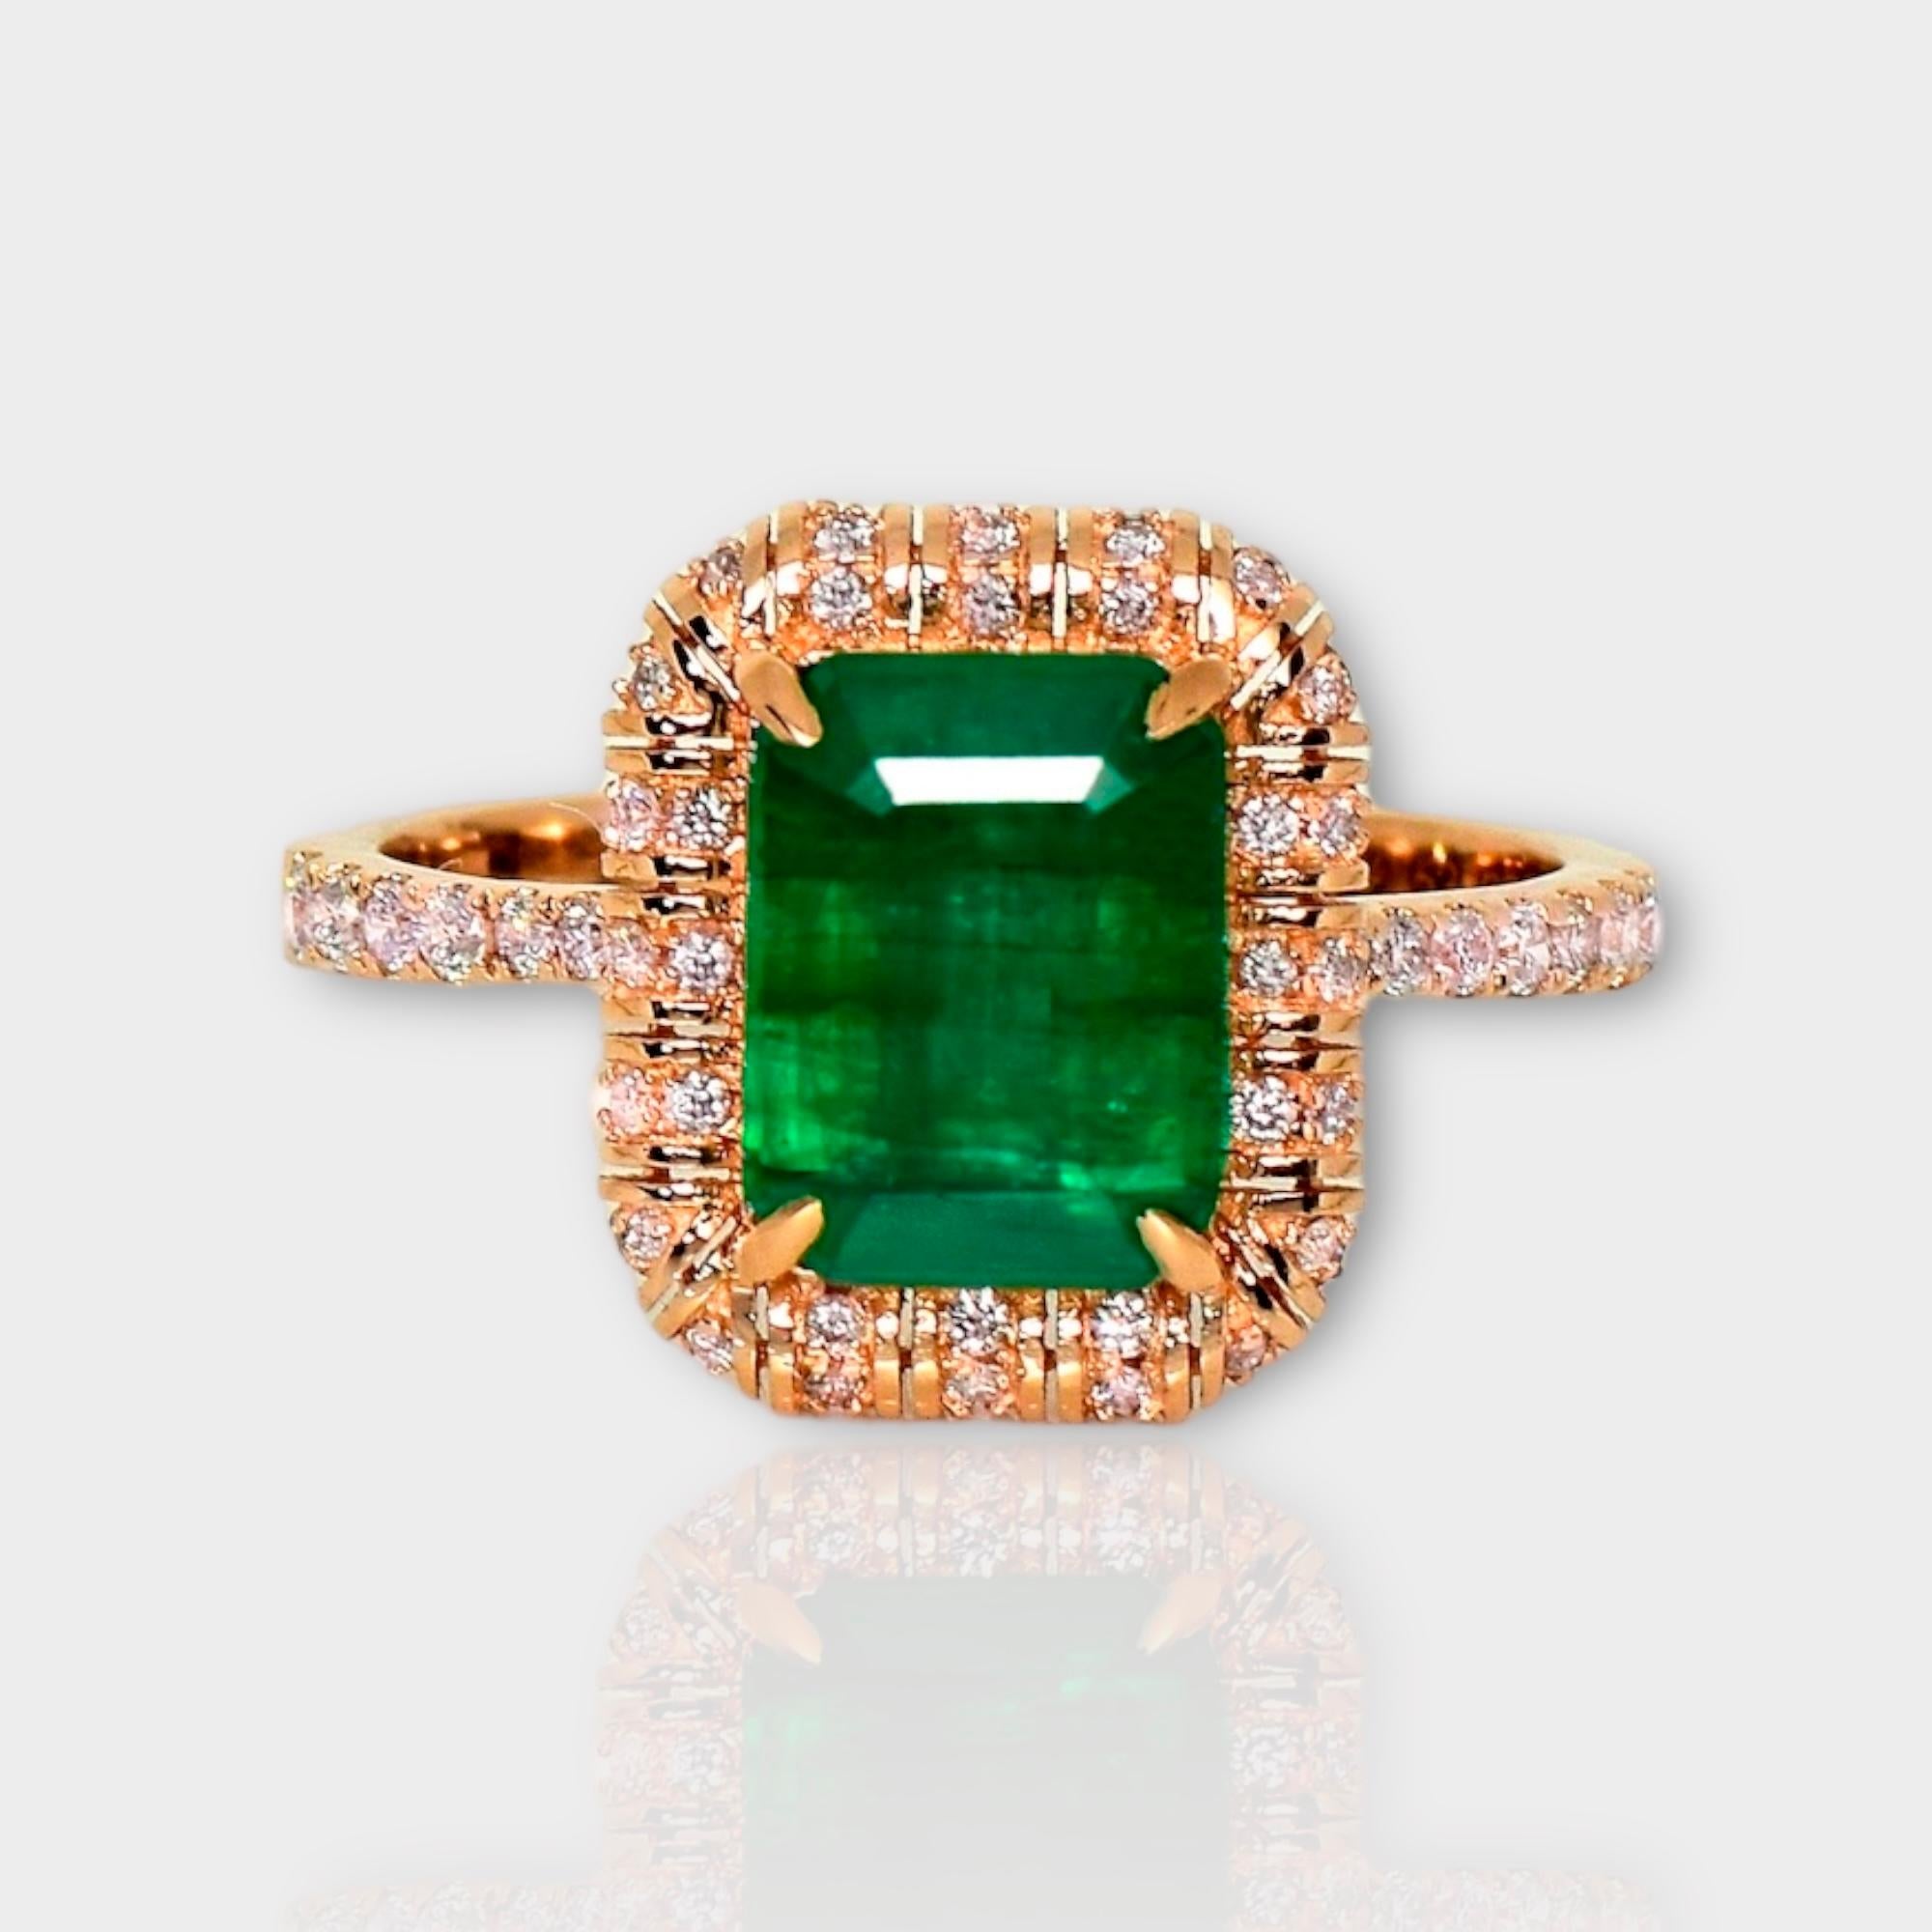 *IGI 14K 2.53 ct Natural Green Emerald&Pink Diamond Art Deco Engagement Ring*
IGI-certified natural Zambia green emerald weighing 2.53 ct set on the 14K rose gold arc deco design band with natural pink diamonds weighing 0.35 ct. 

The good-quality